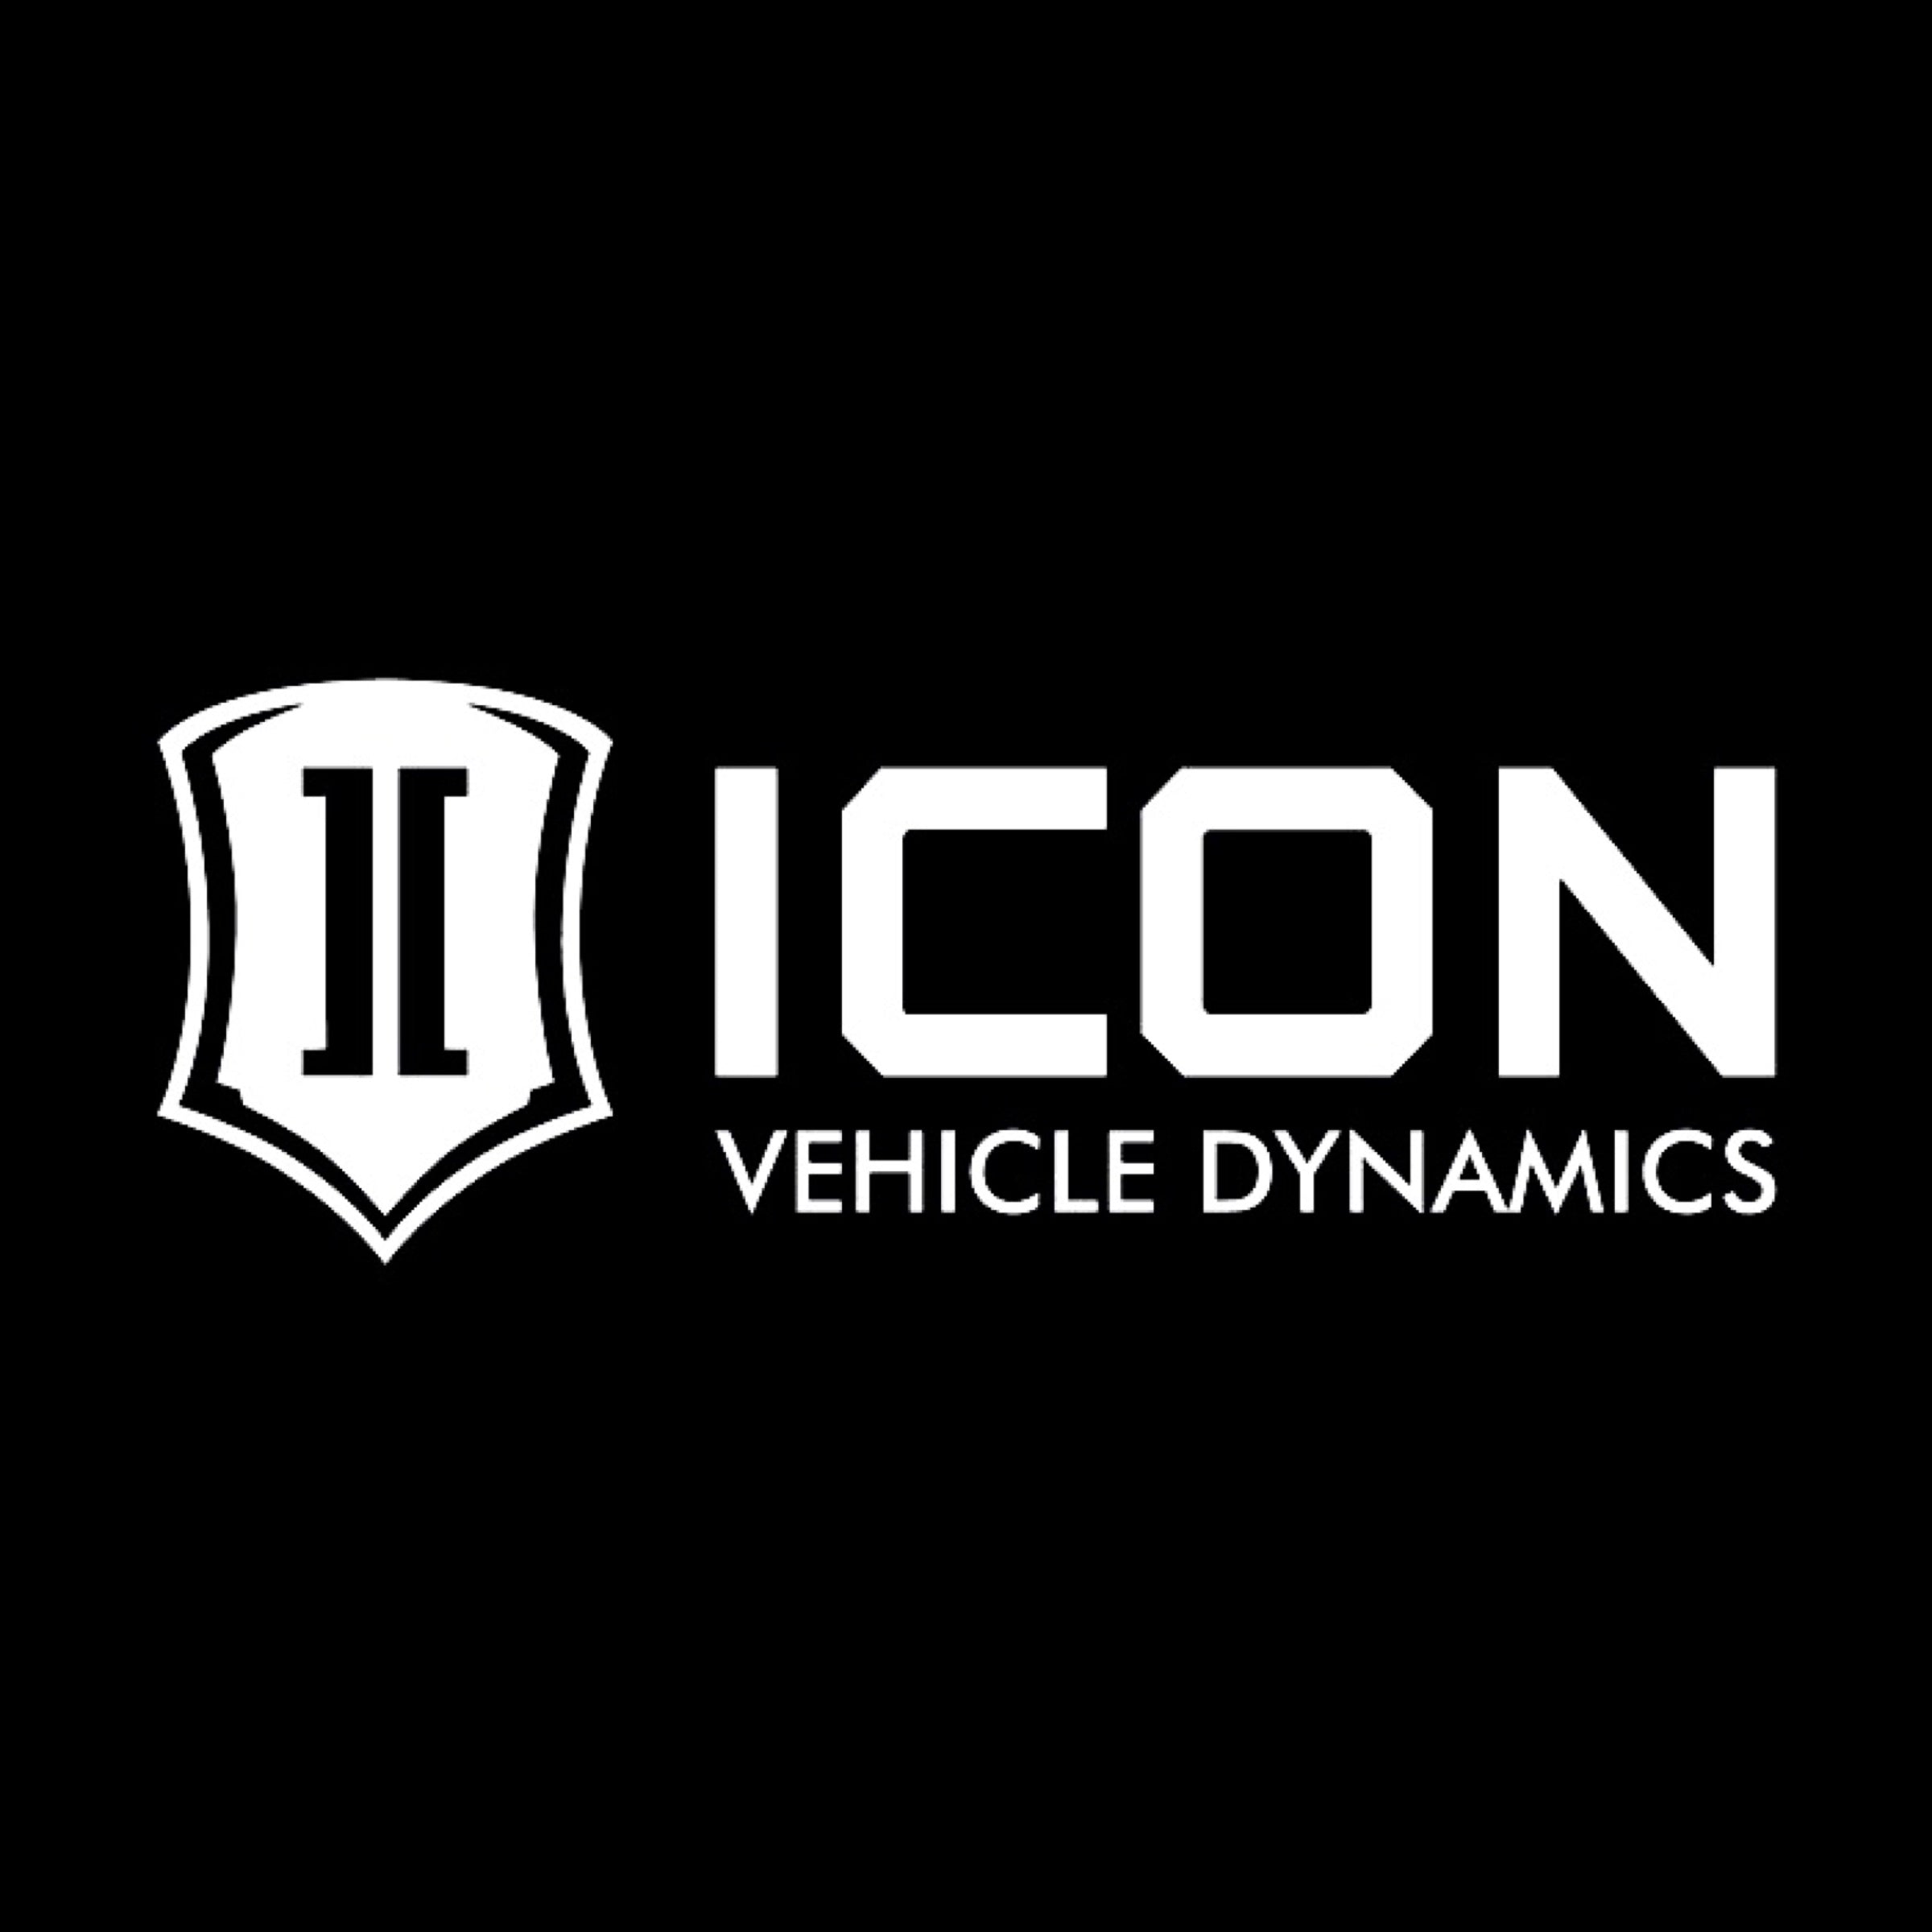 Icon Vehicle Dynamics logo in white with Black Background